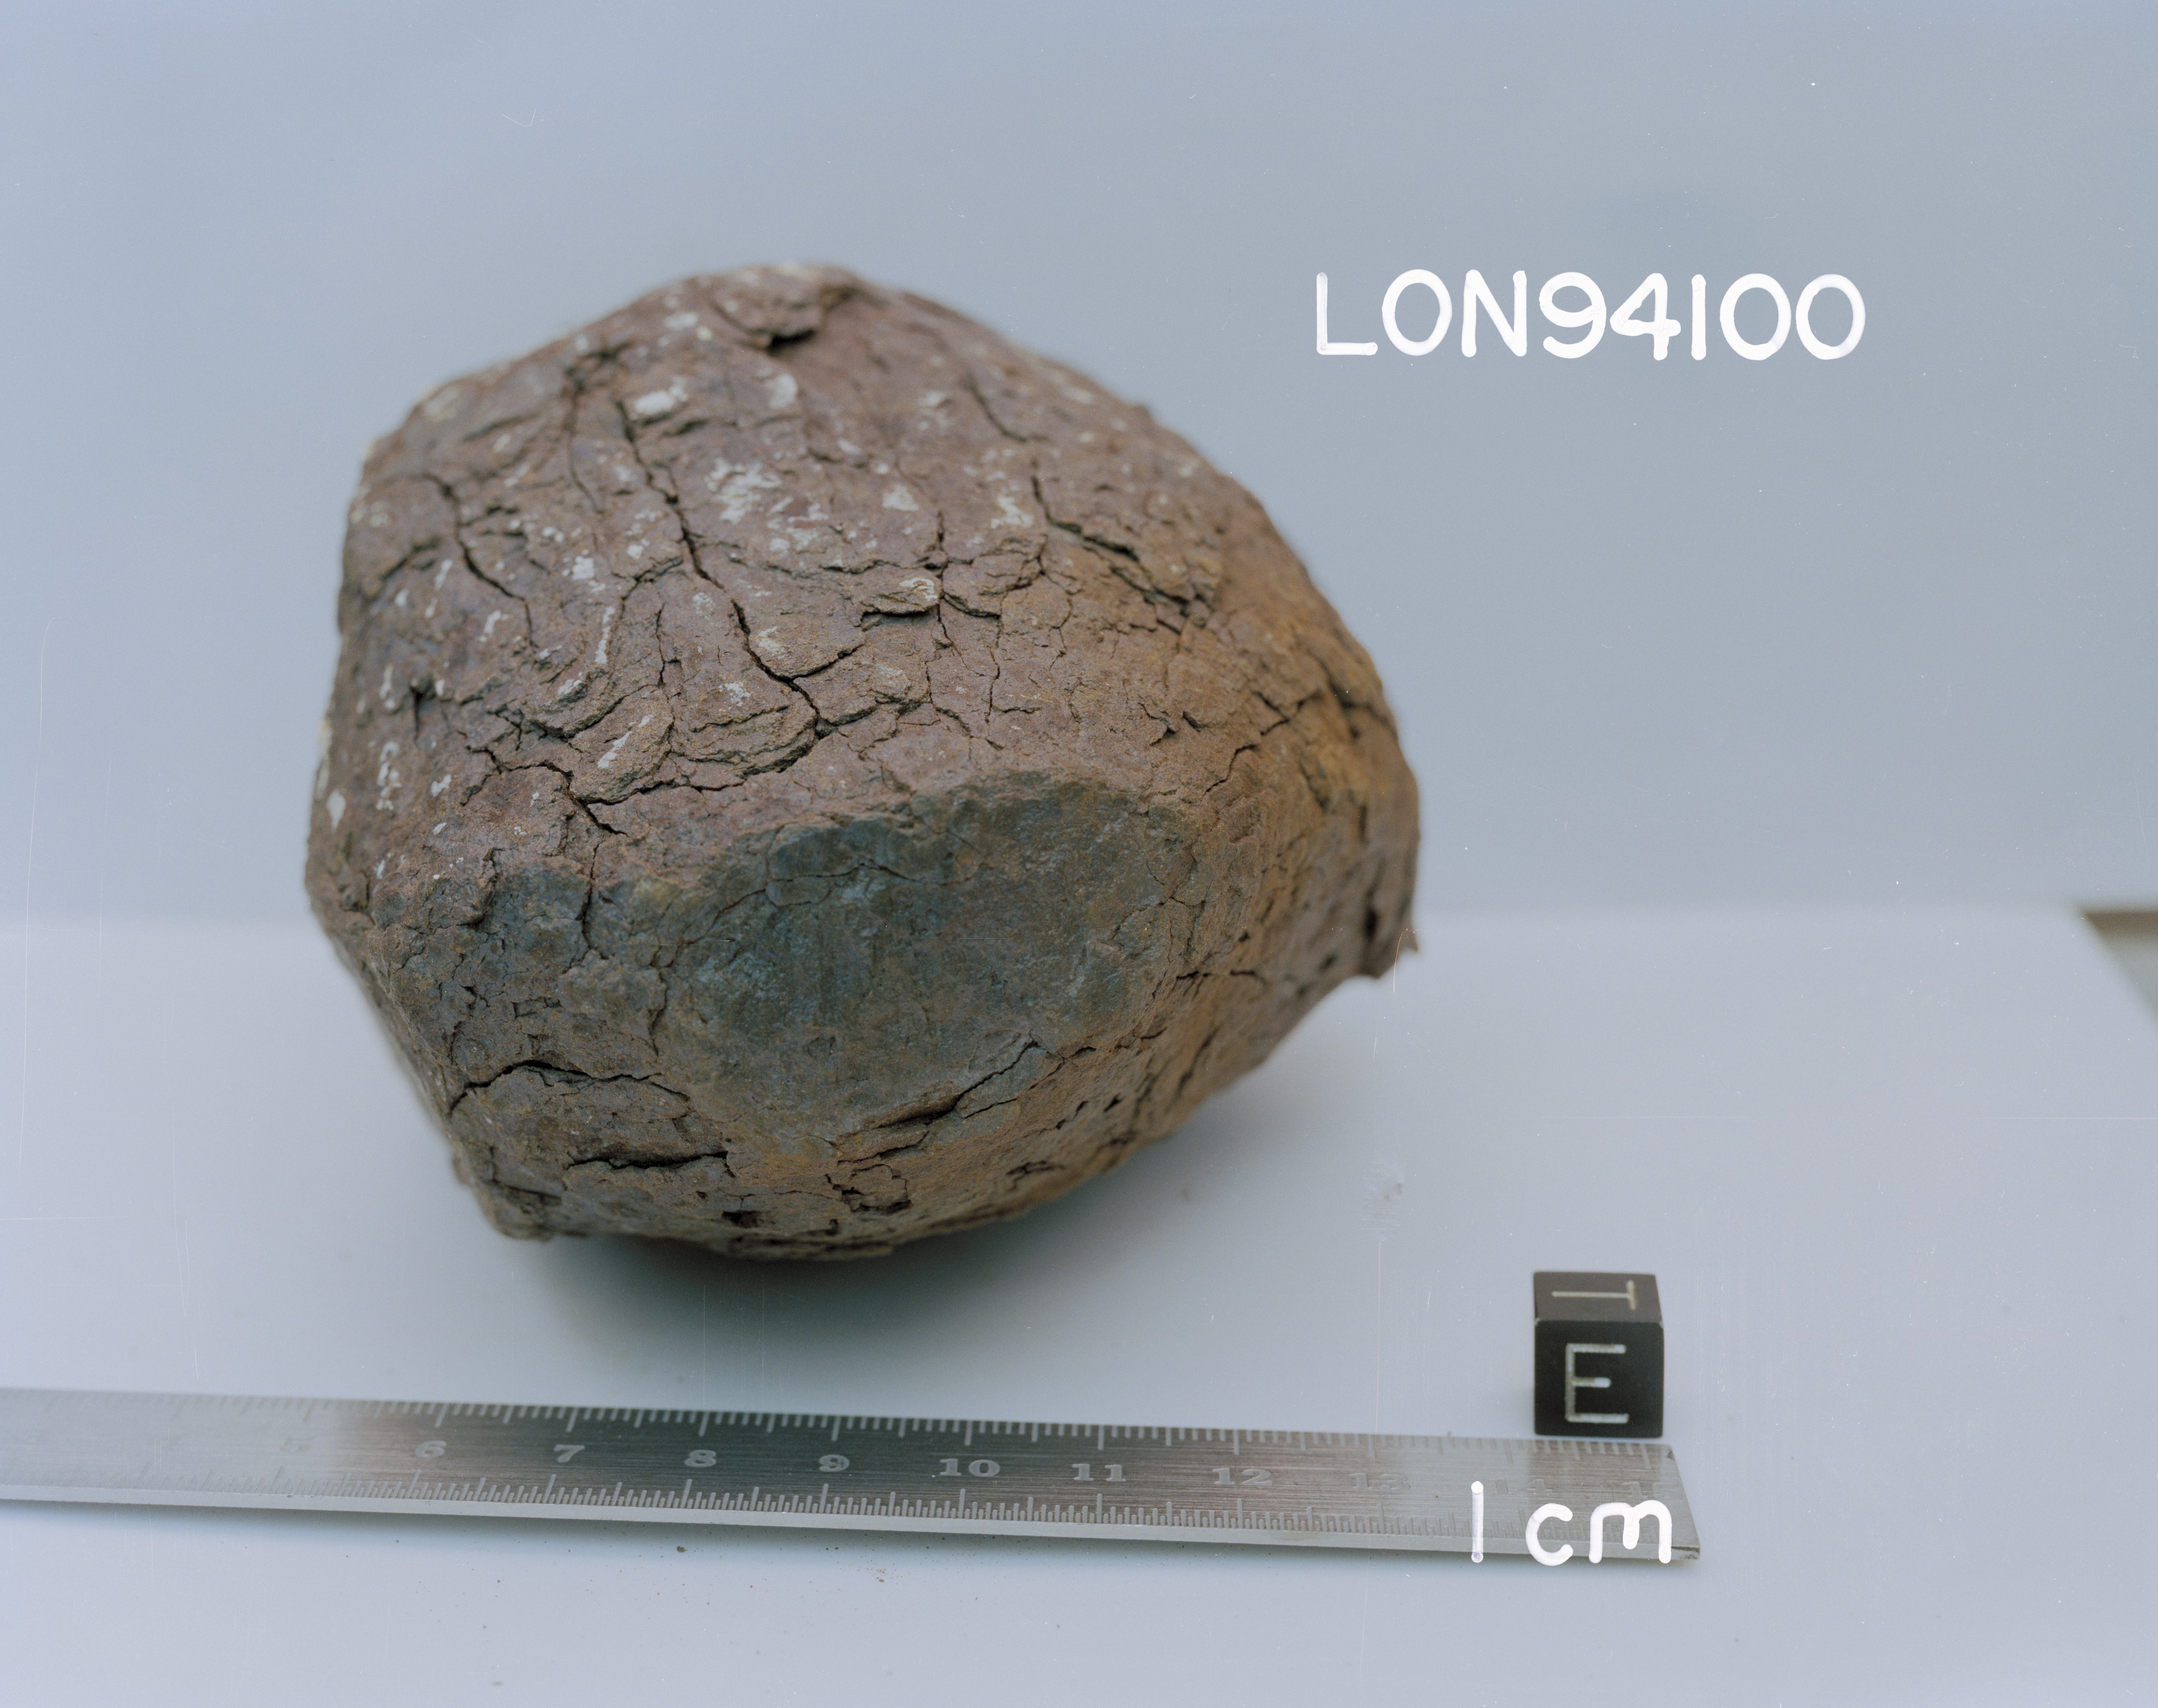 East View of Sample LON 94100 (Photo Number: S95-14601)